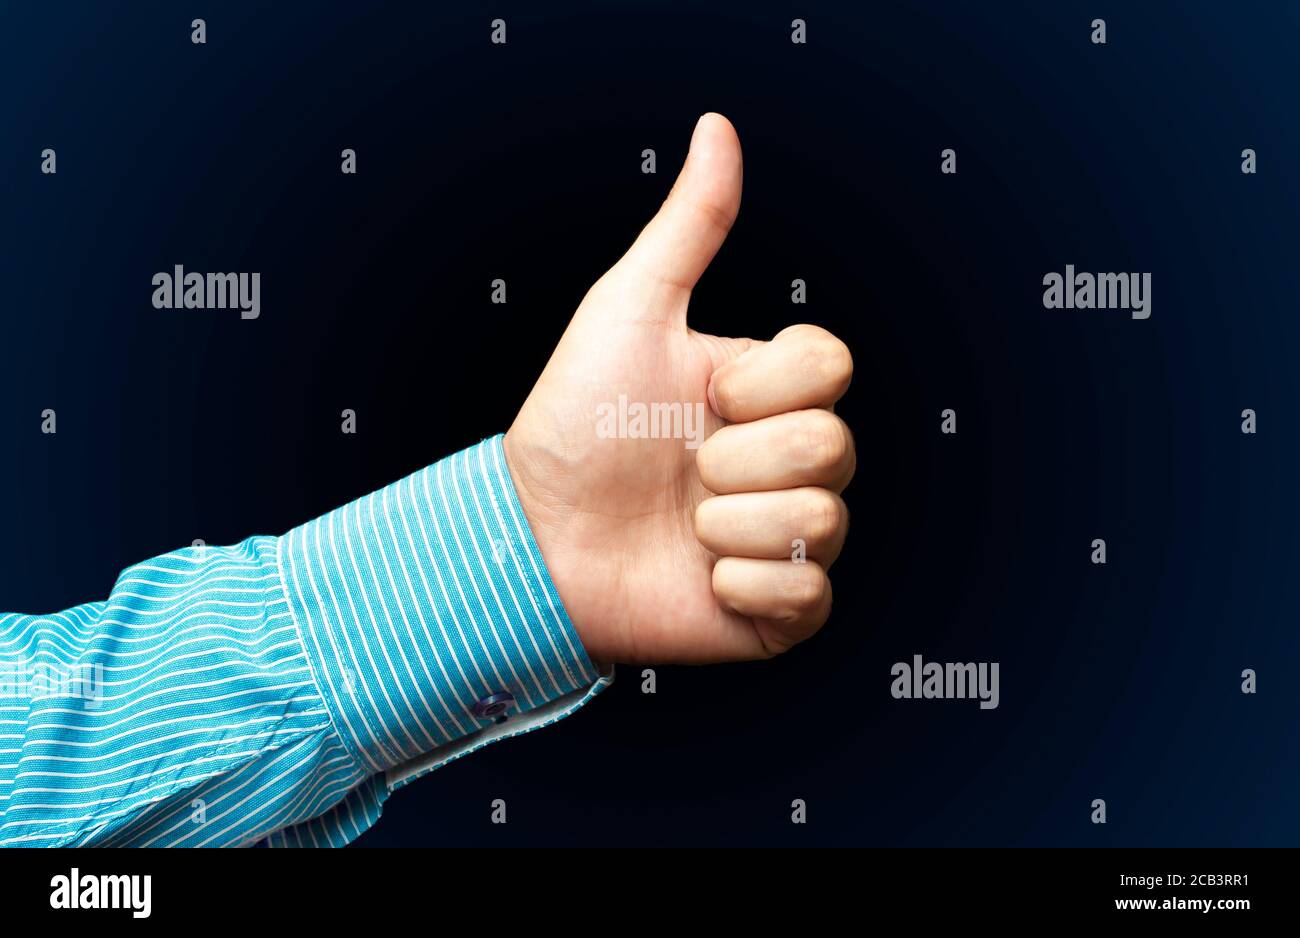 A young man' hand is displaying a thumbs up, indicating that he likes or approves of something on dark background Stock Photo